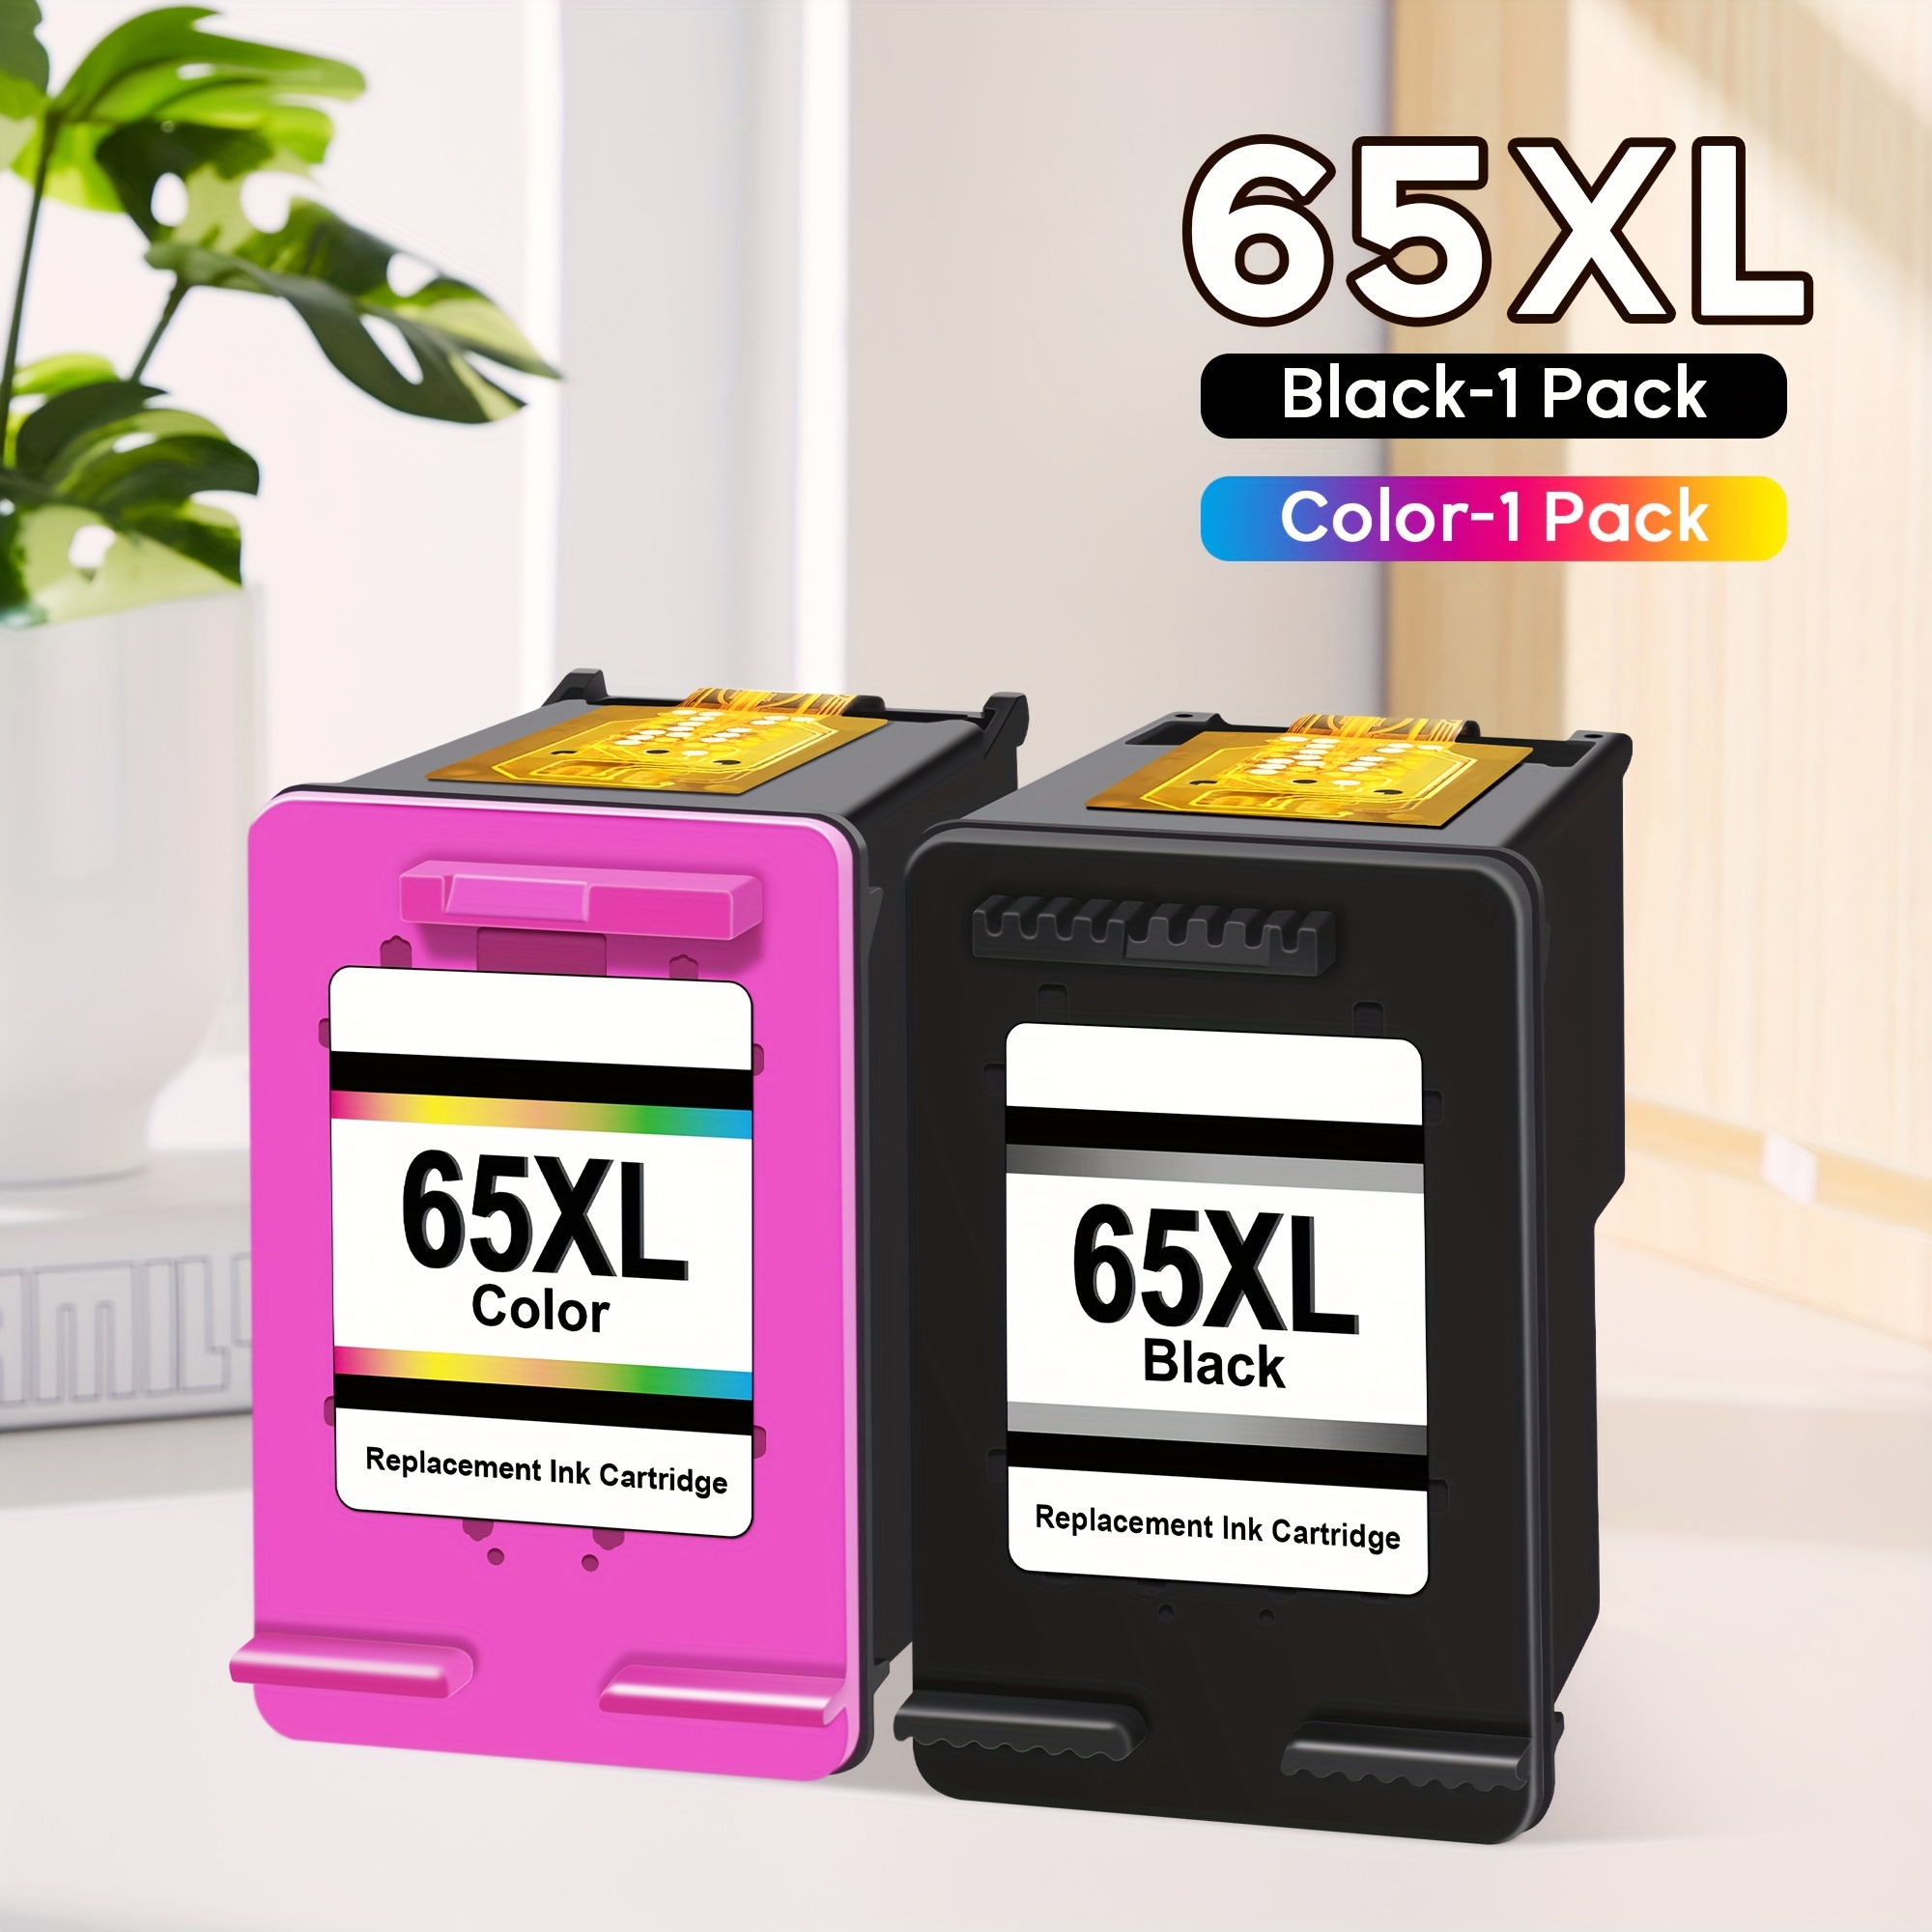 

2 Pack 65 Remanufactured Ink Cartridge Replacement For Ink 65 Xl 65xl (black And Color Combo) For Hp65 5055 5000 5052 5010 5070 5014 3755 3700 3772 2600 3752 2652 2655 2622 2640 Printers